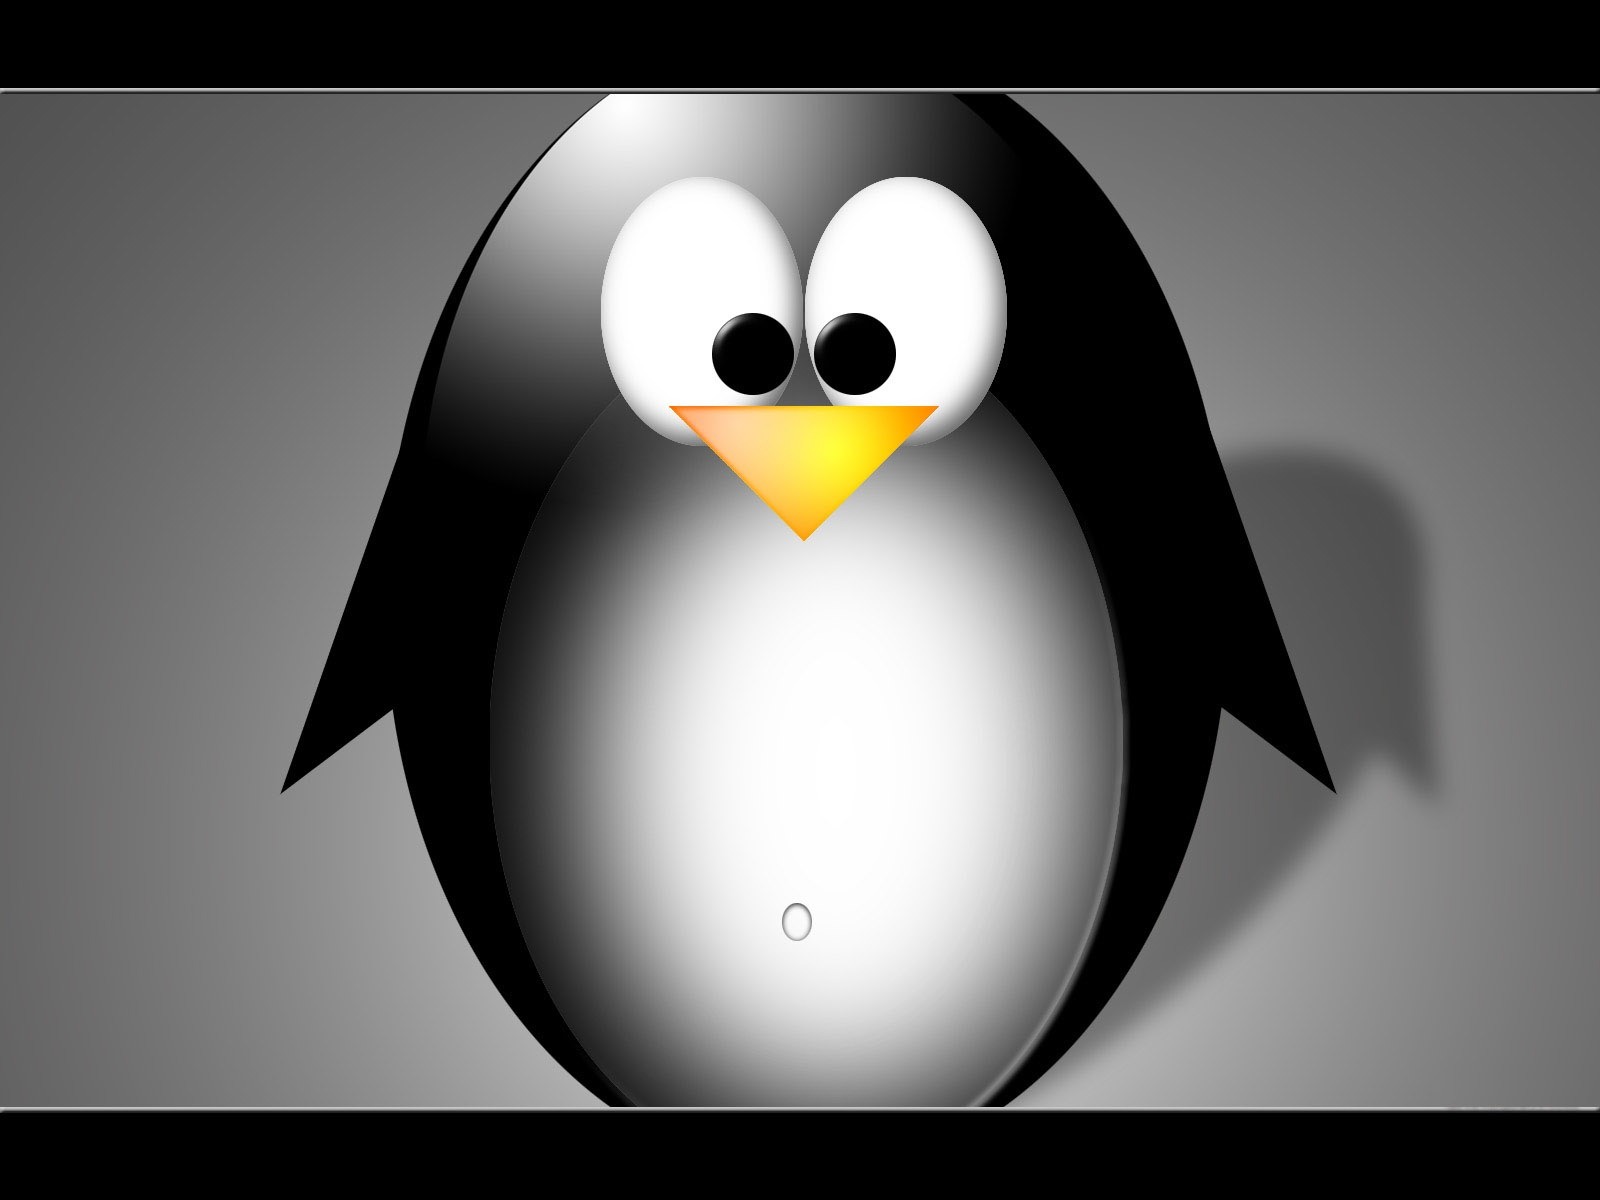 Linux tapety (1) #3 - 1600x1200